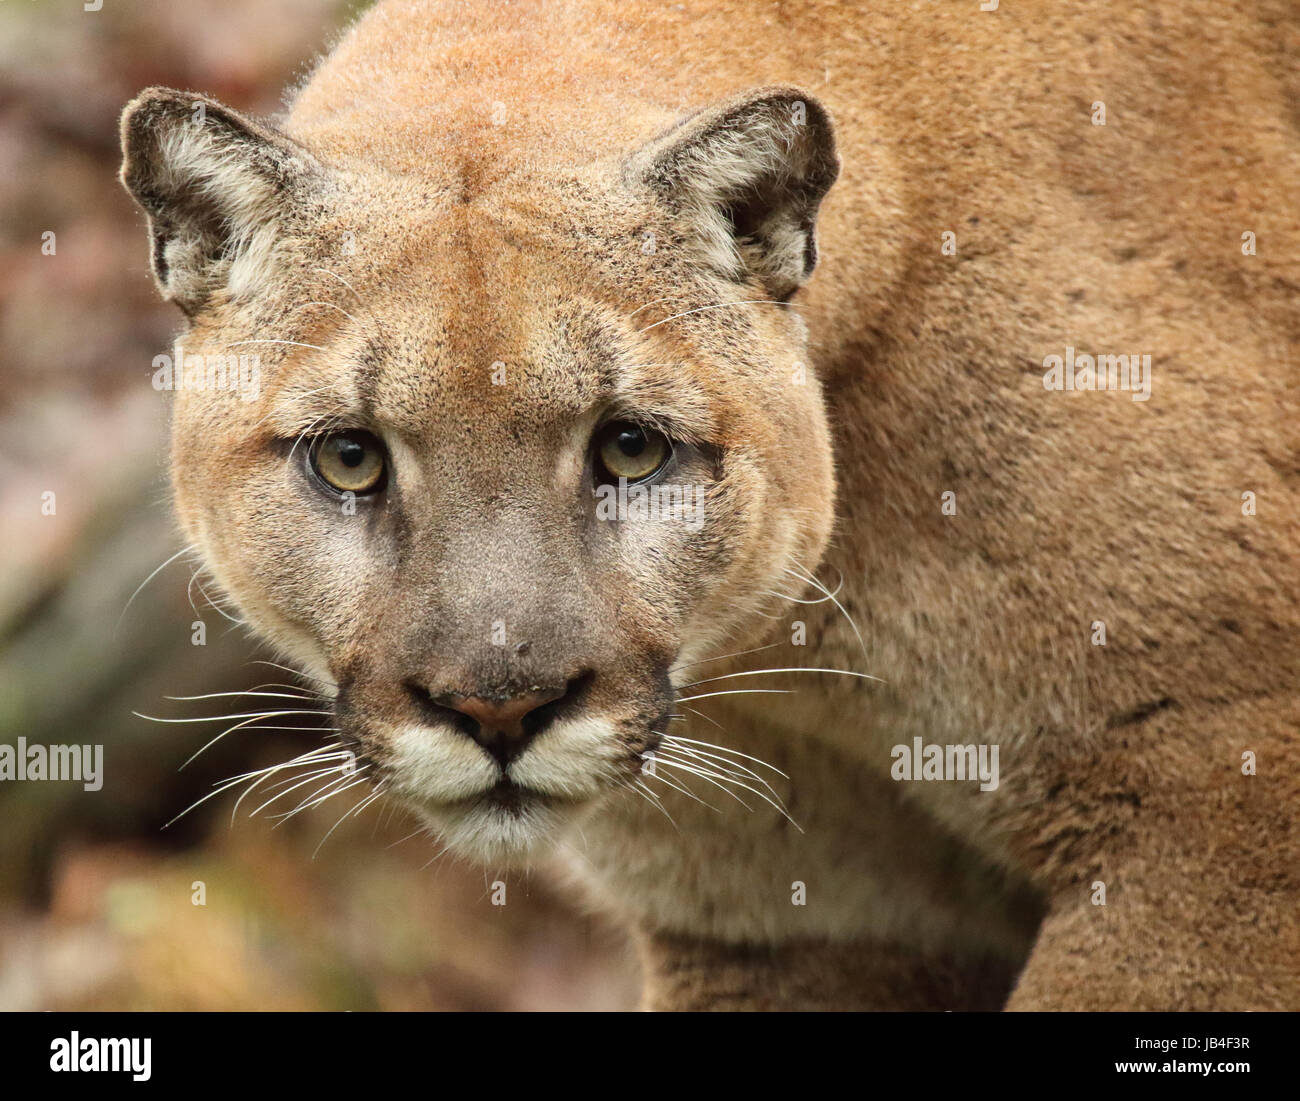 A large male Puma (also called Mountain Lion or Cougar) peering in ...